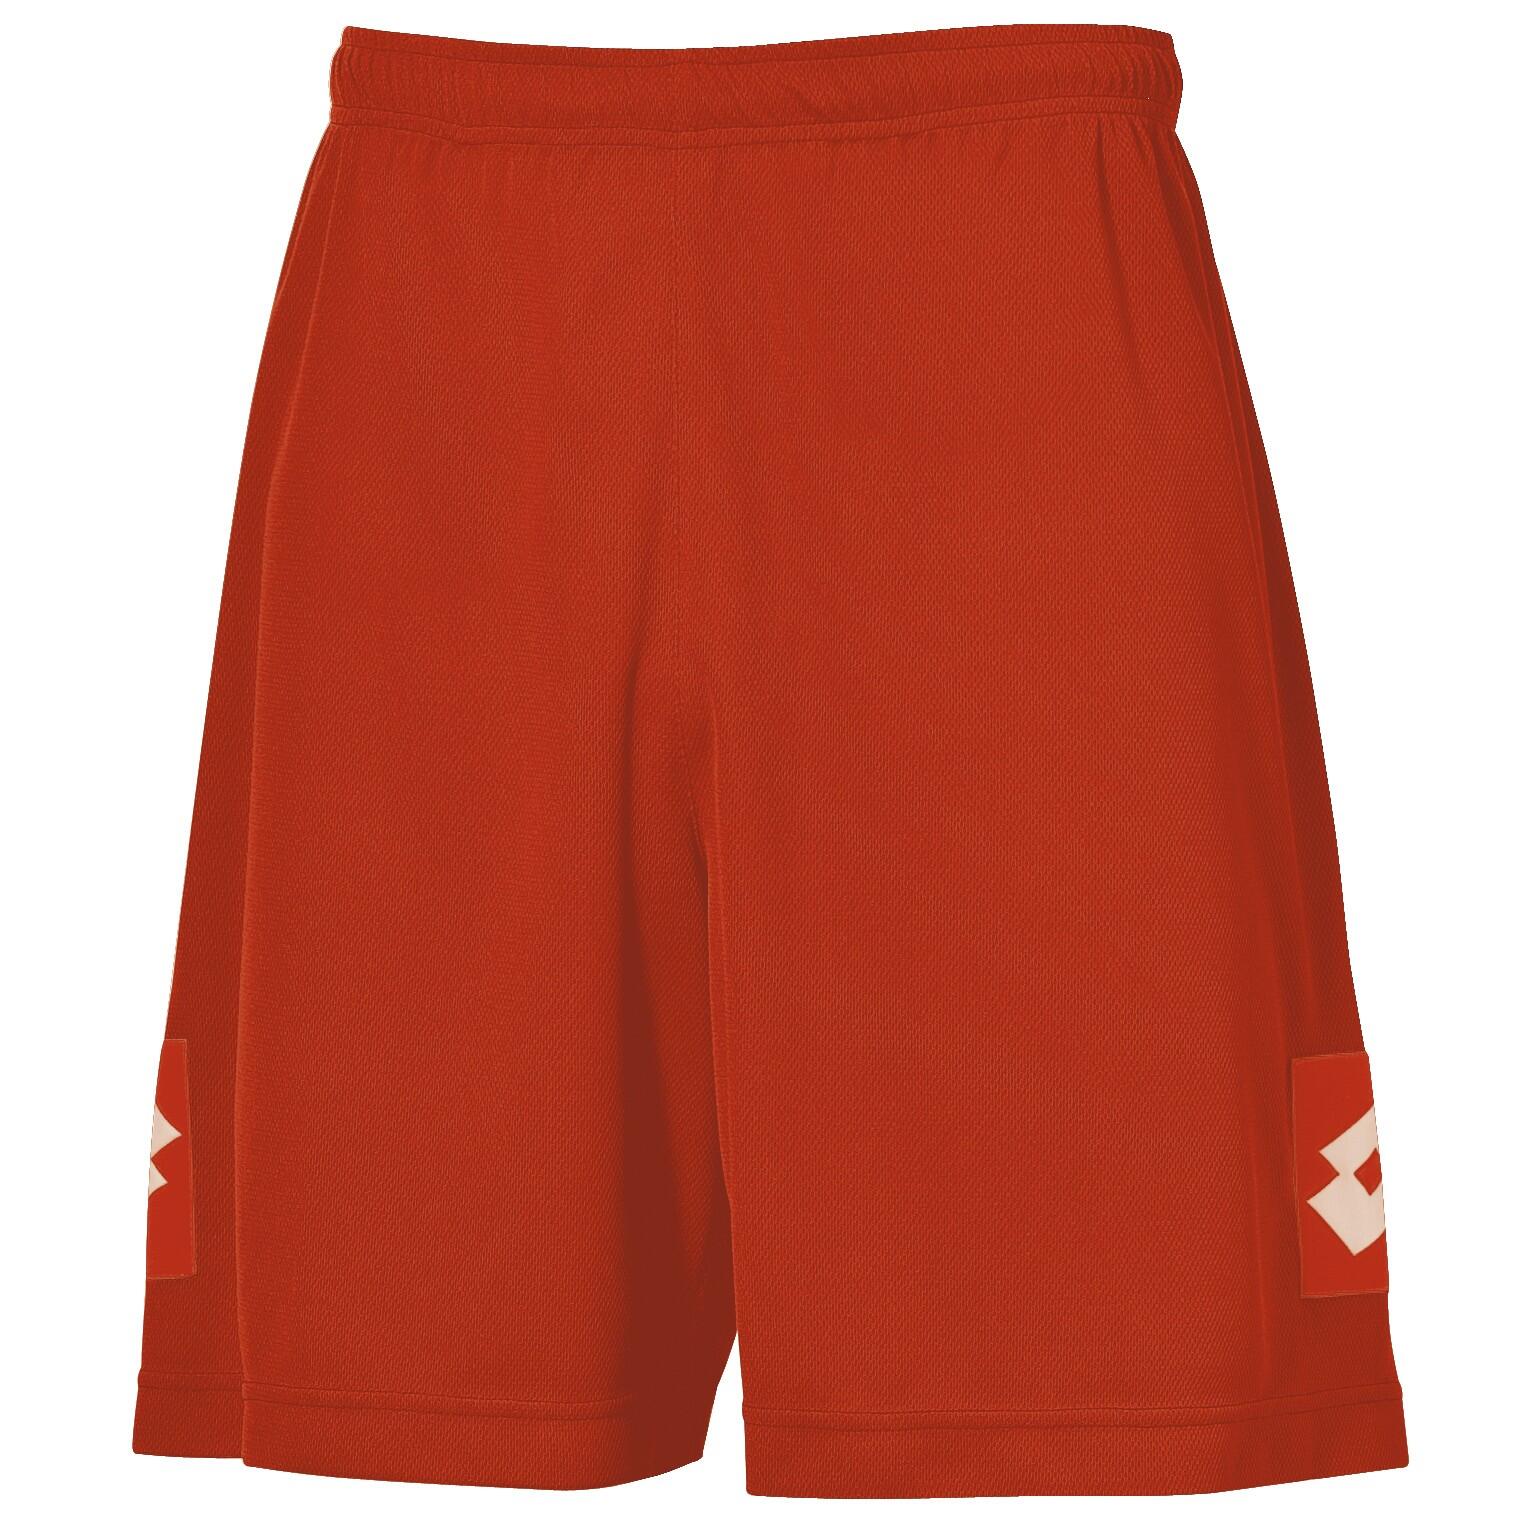 Mens Football Sports Speed Shorts (Flame Red) 1/2